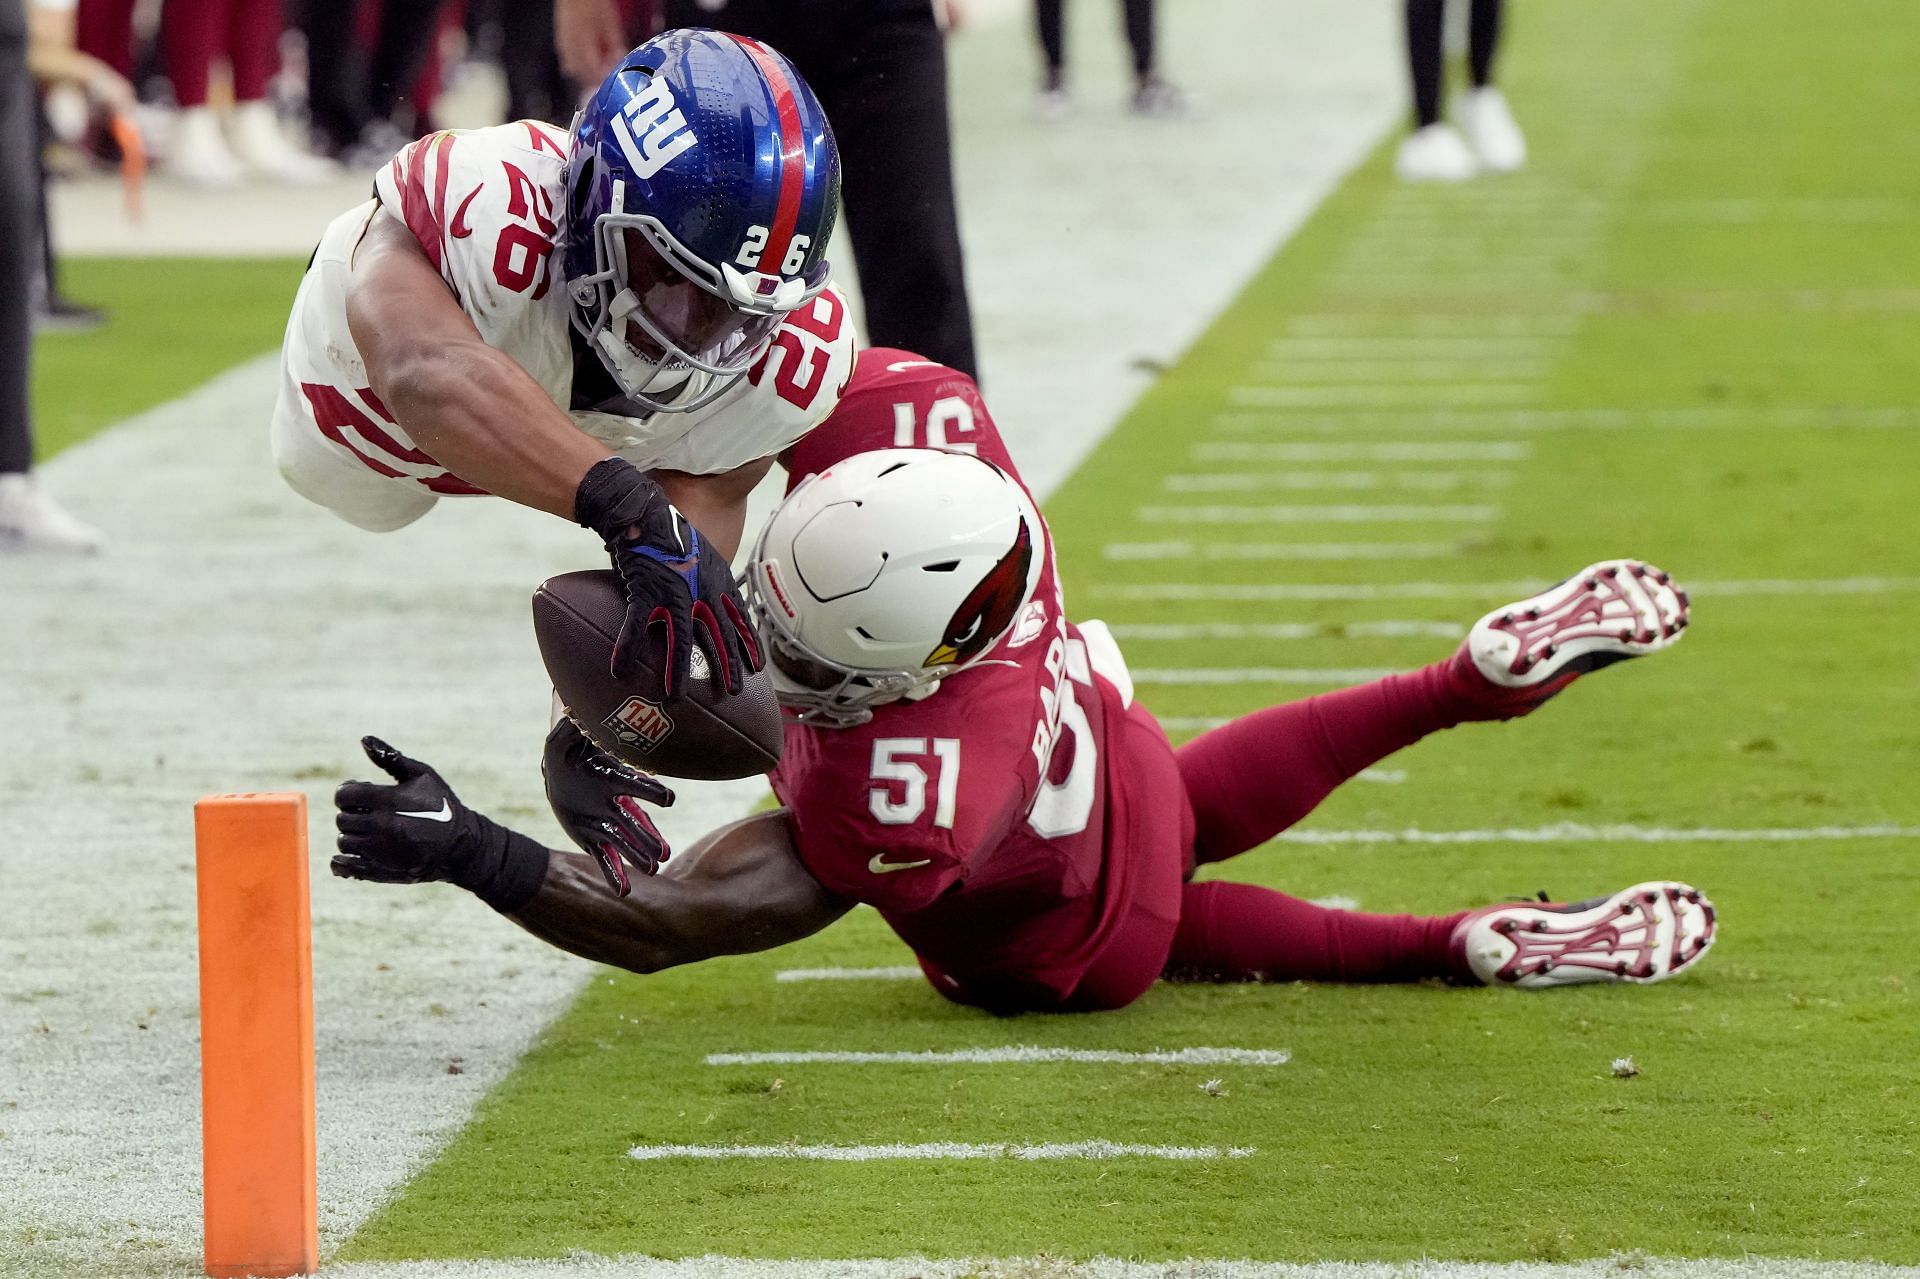 Saquon Barkley's immense value magnified in Giants' loss to 49ers